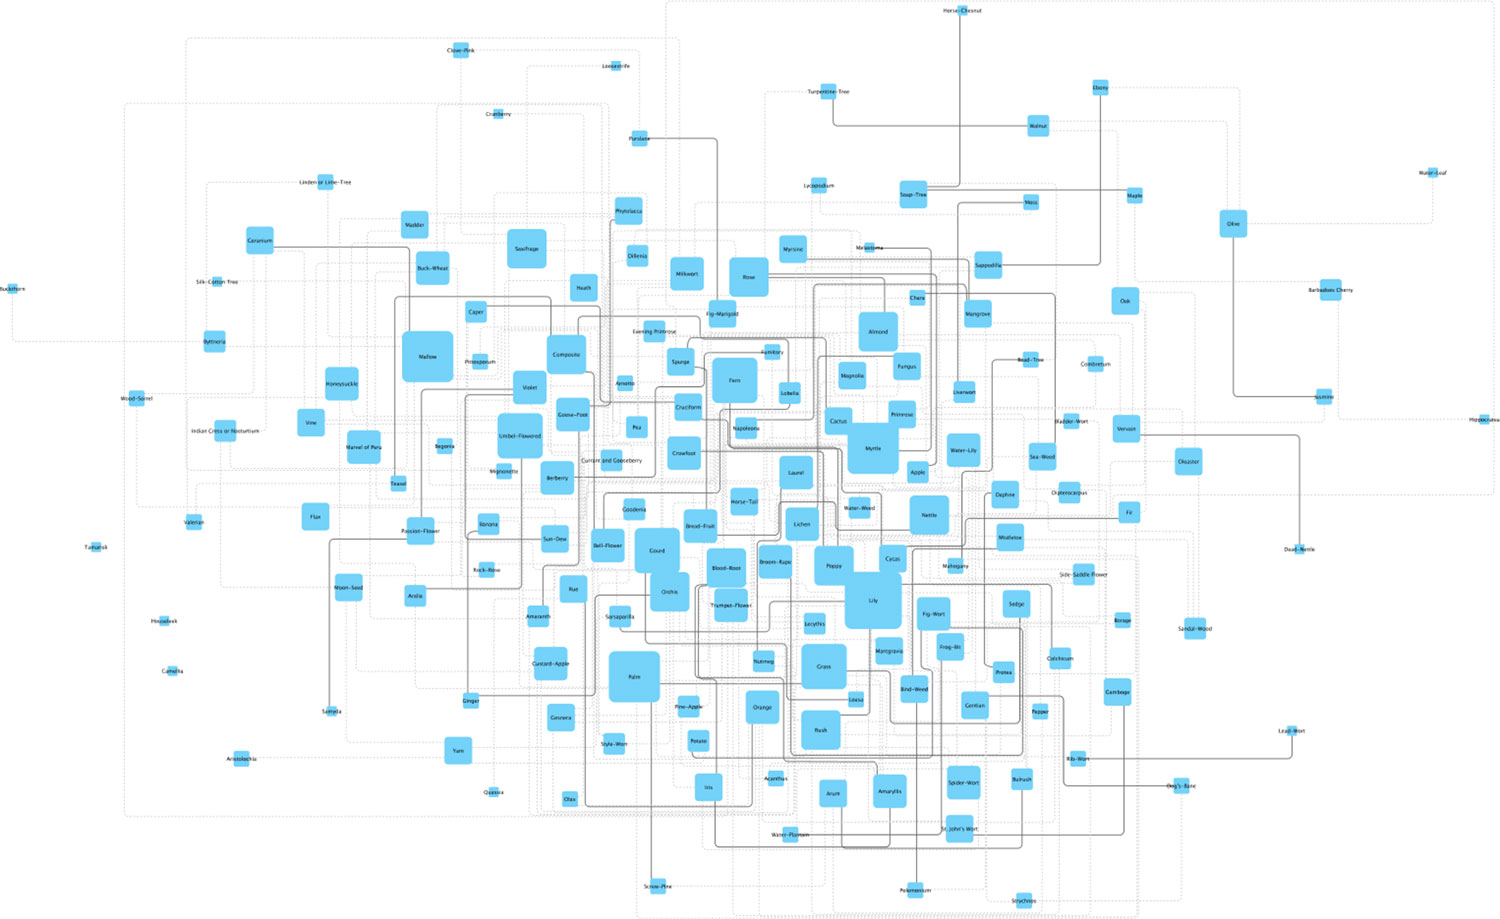 More polished example from Cytoscape